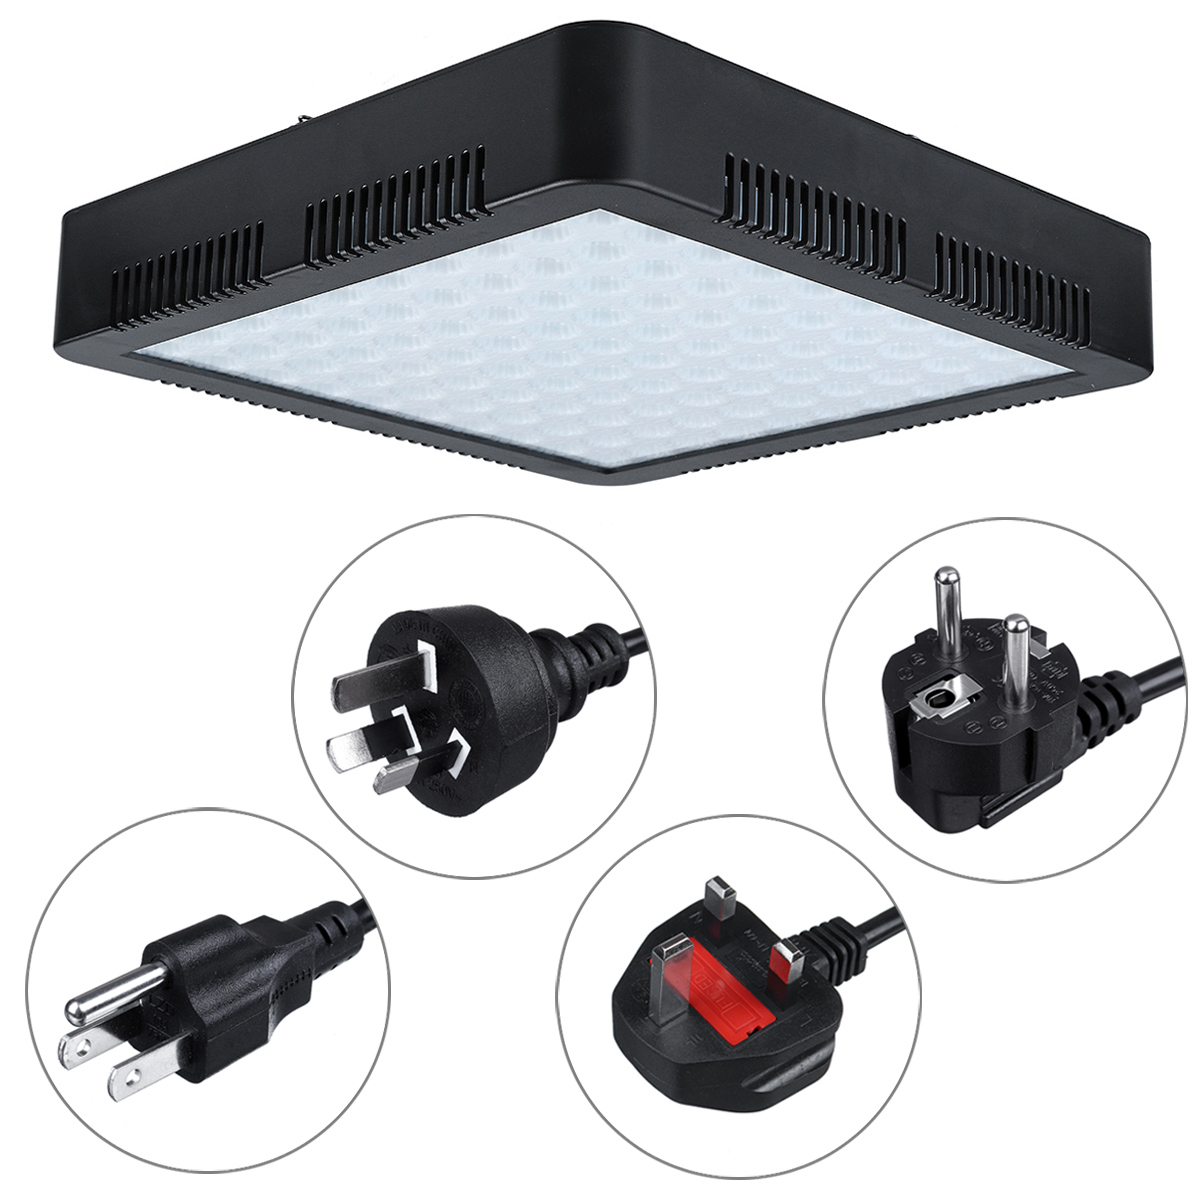 300W-LED-Grow-Light-Full-Spectrum-Hydroponic-Indoor-Plant-Flower-Growing-Bloom-Lamp-AC85-265V-1728585-3